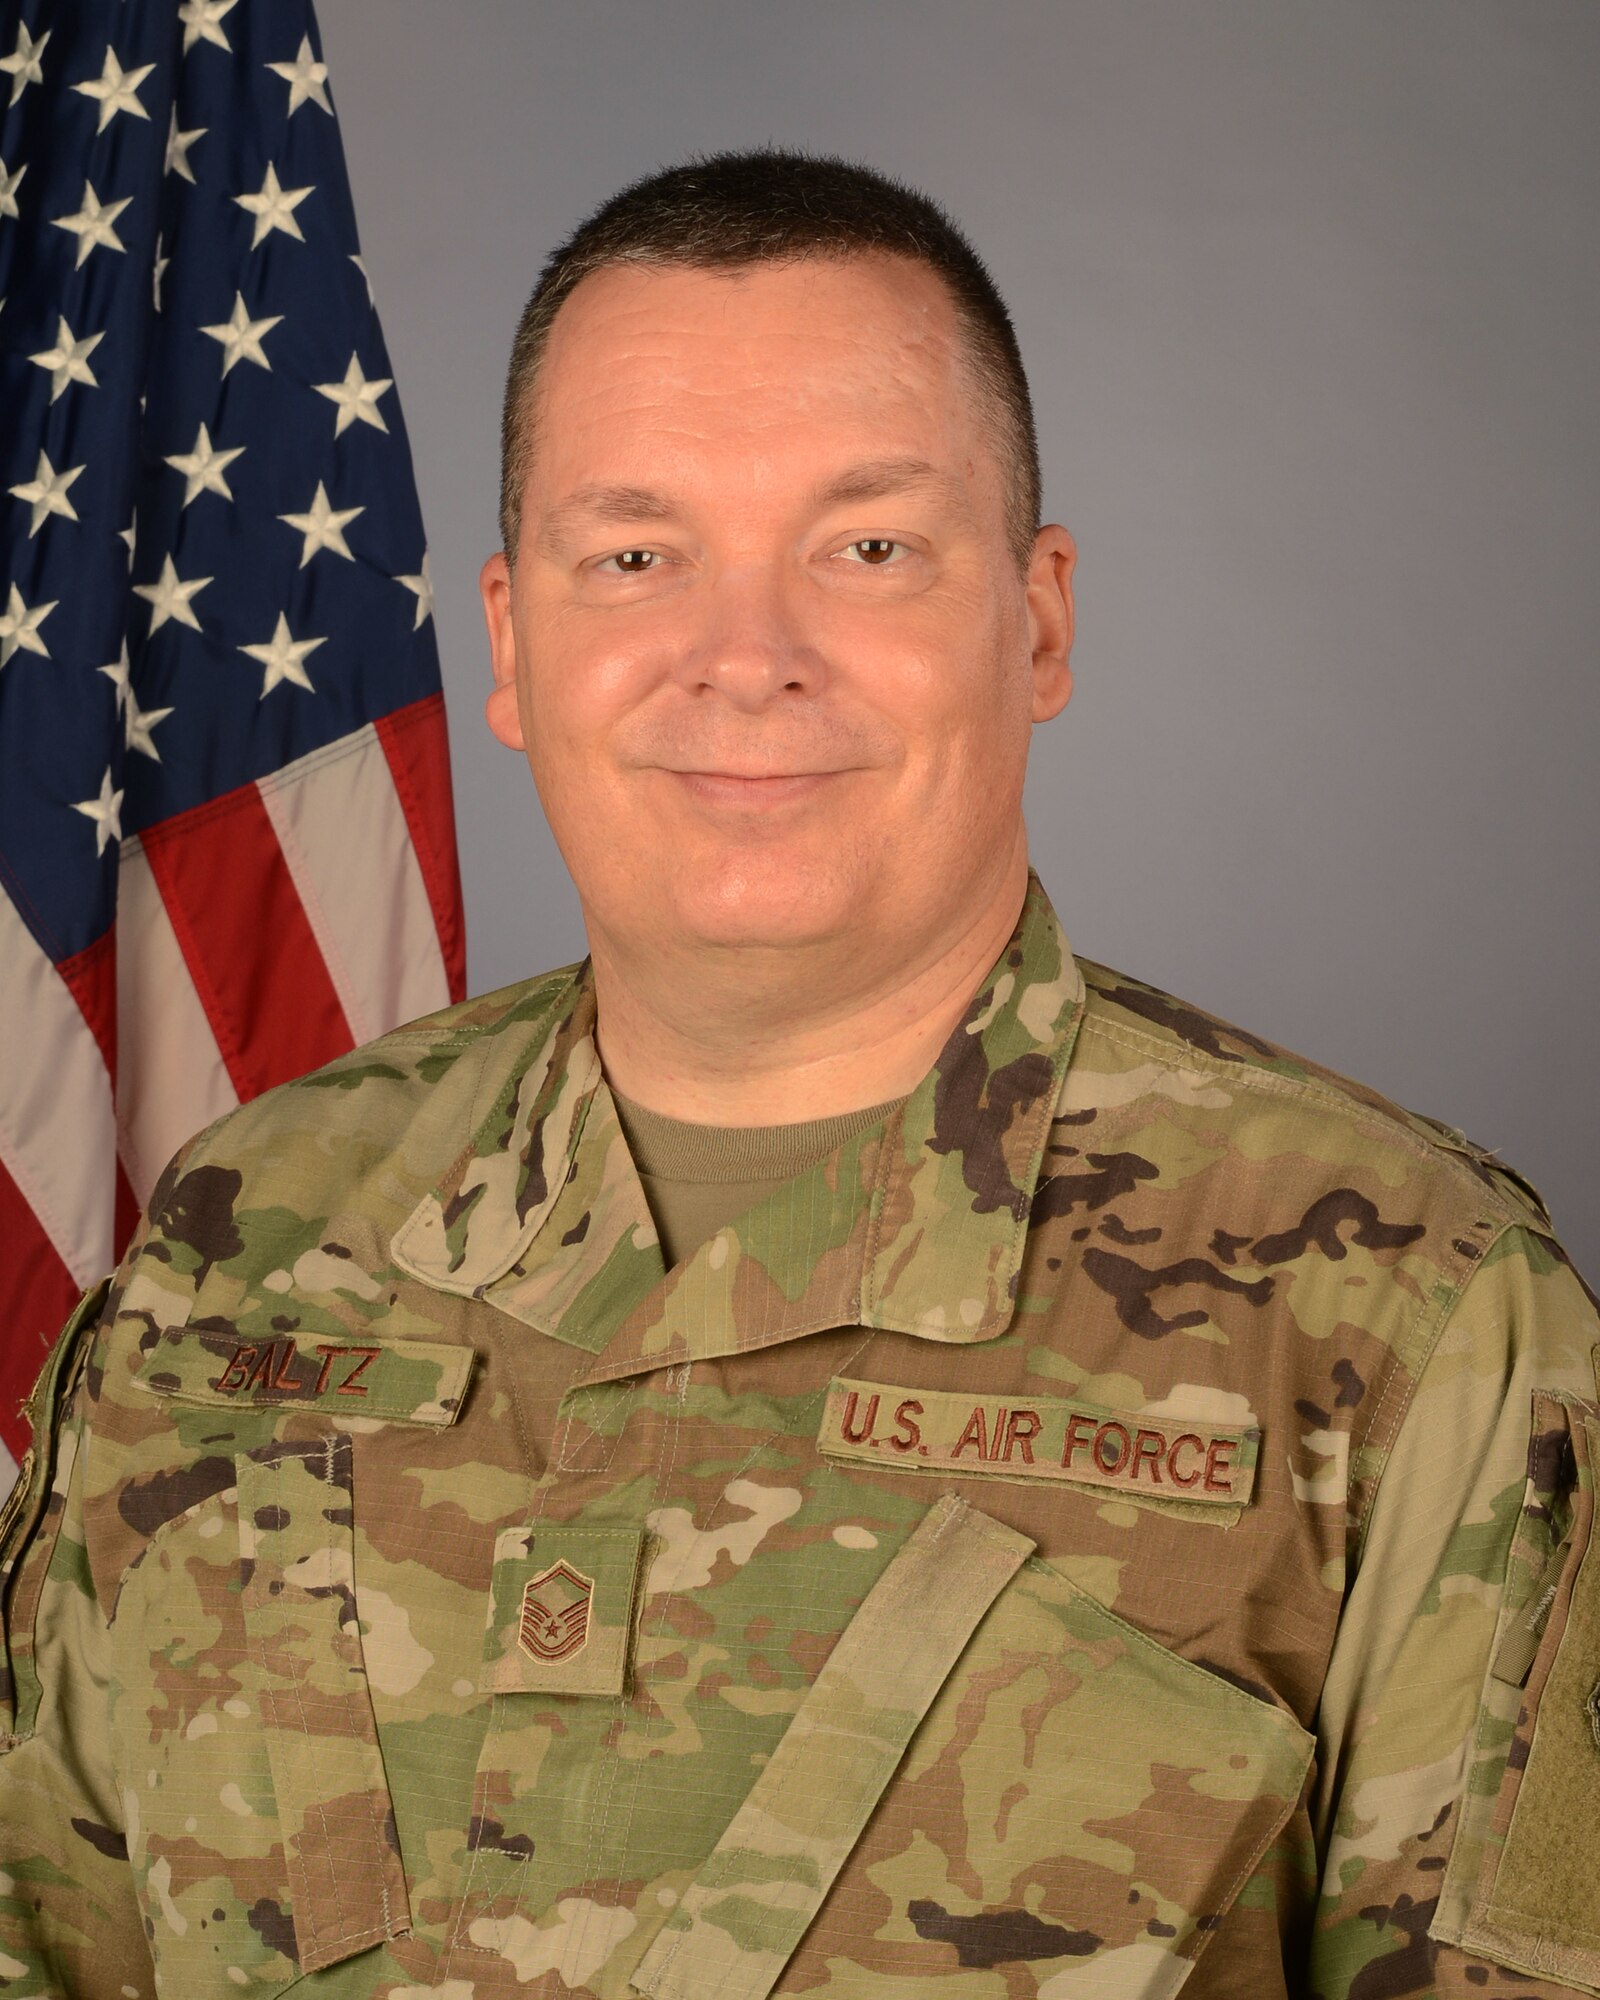 U.S. Air Force Master Sgt. John Baltz, 169th Fighter Wing chaplains assistant, August 15, 2021 at McEntire Joint National Guard Base, South Carolina. (U.S. Air National Guard photo by Senior Master Sgt. Edward Snyder, 169th Fighter Wing Public Affairs)